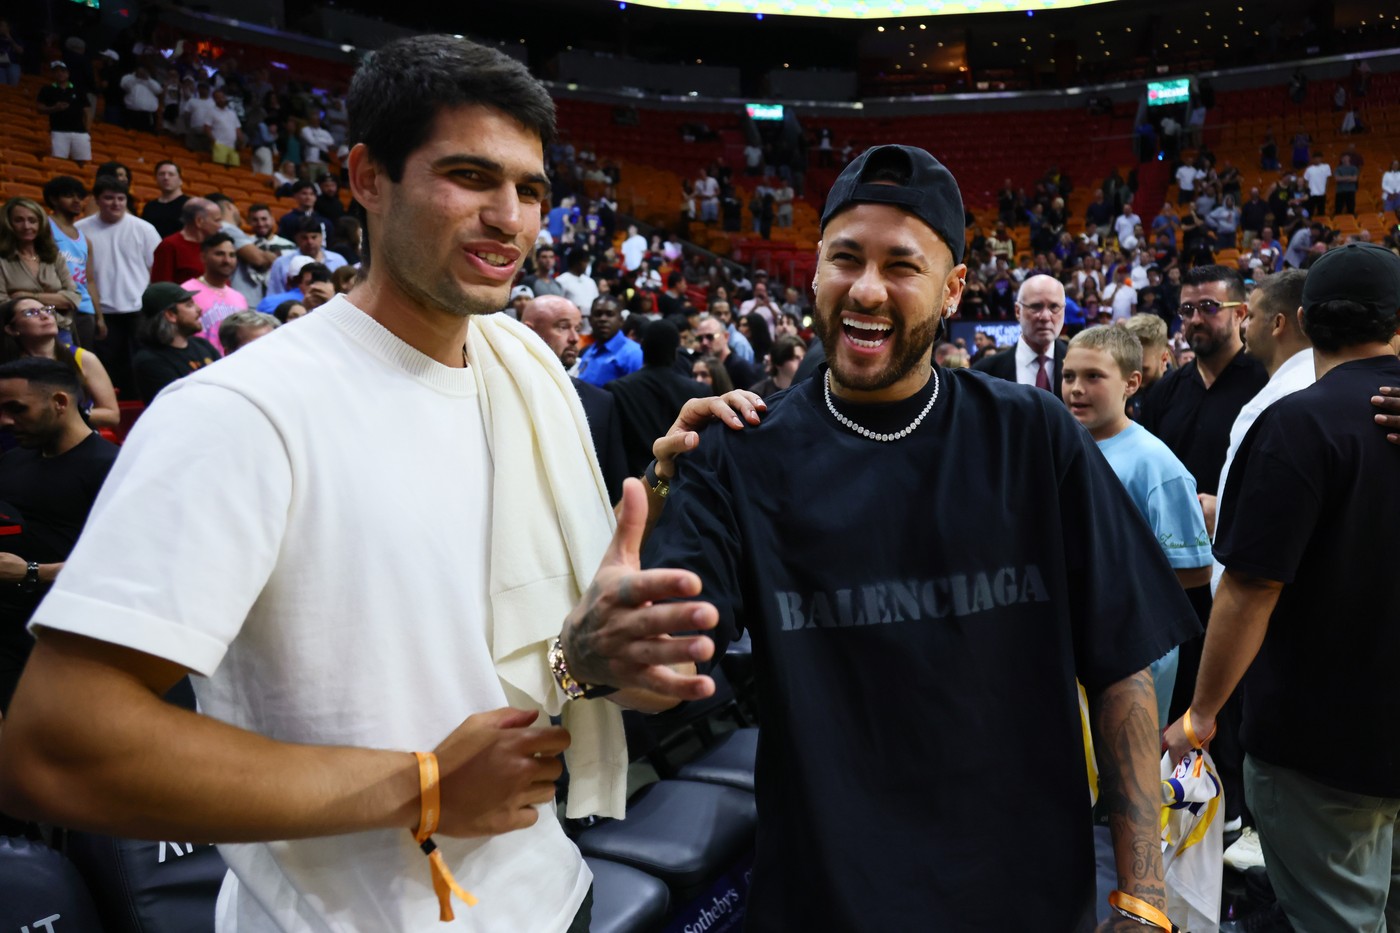 Mar 26, 2024; Miami, Florida, USA; Spanish professional tennis Player Carlos Alcaraz and Brazilian soccer player Neymar Jr. react after the game between the Miami Heat and the Golden State Warriors at Kaseya Center.,Image: 859907265, License: Rights-managed, Restrictions: , Model Release: no